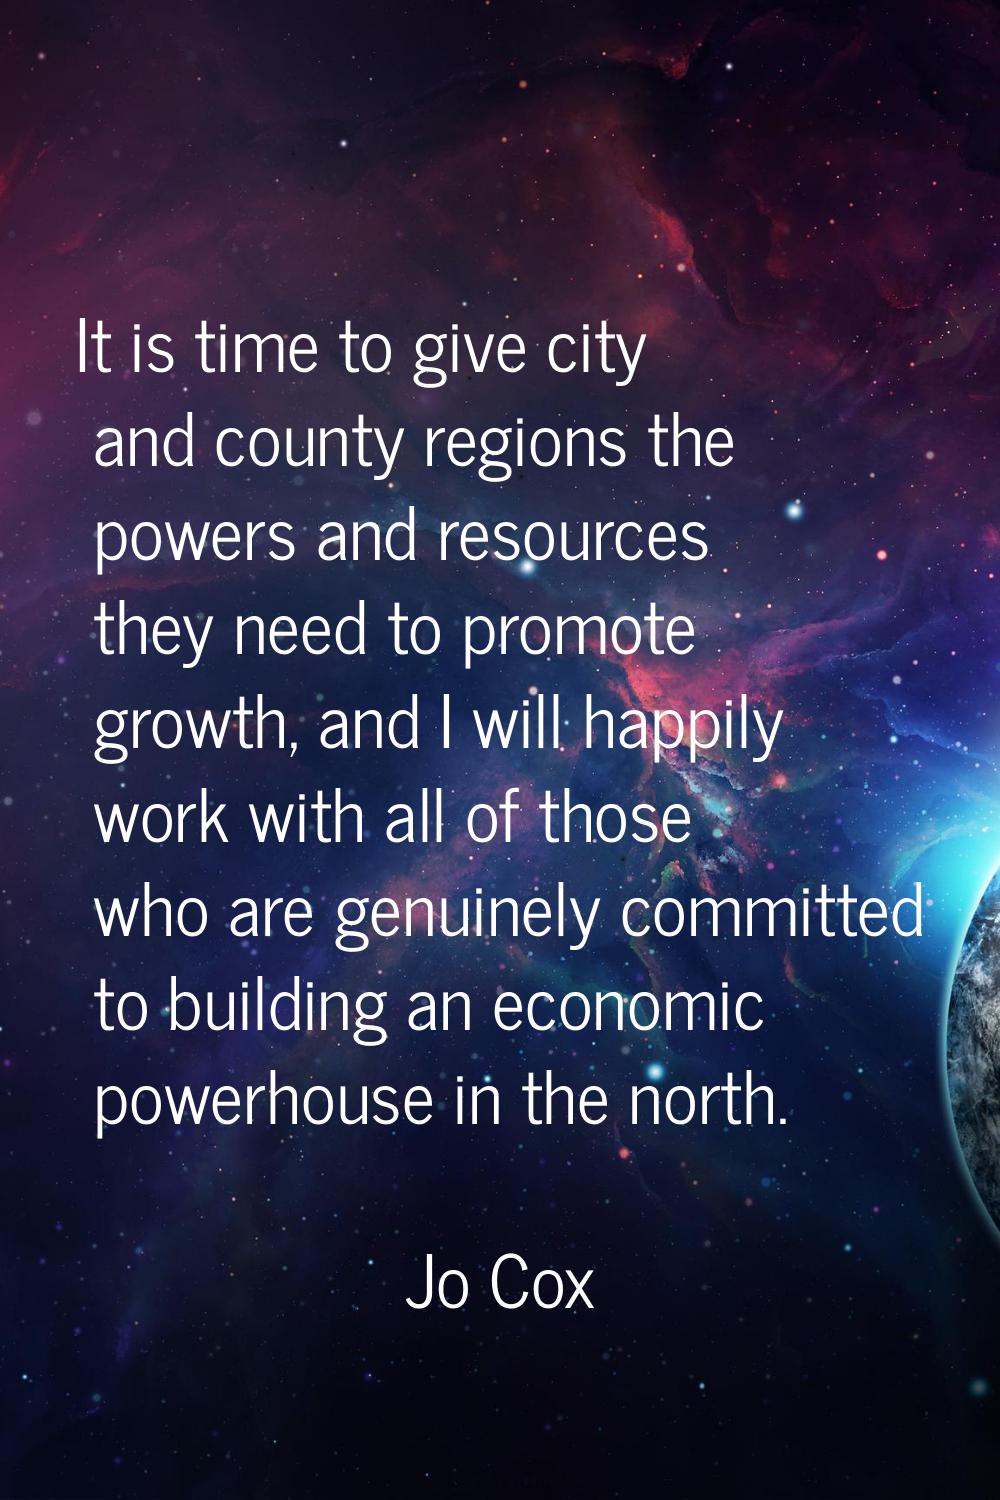 It is time to give city and county regions the powers and resources they need to promote growth, an